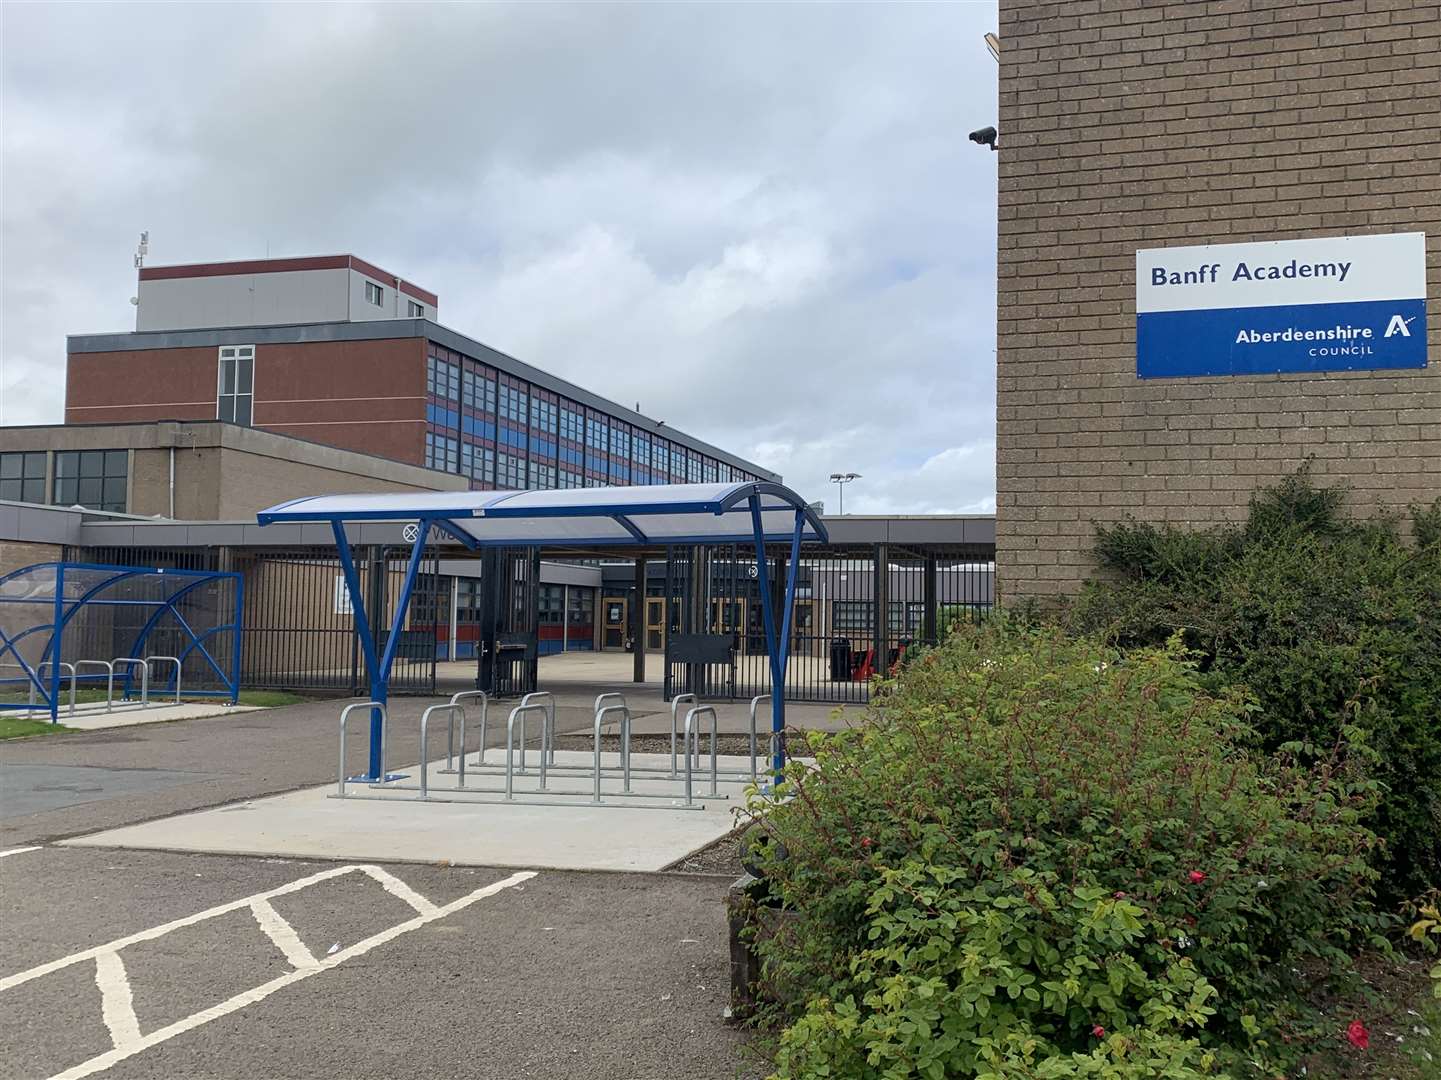 Rumours posted online saying Banff Academy had pupils identifying as cats requesting litter trays in the school's toilets have been described as false by Aberdeenshire Council.